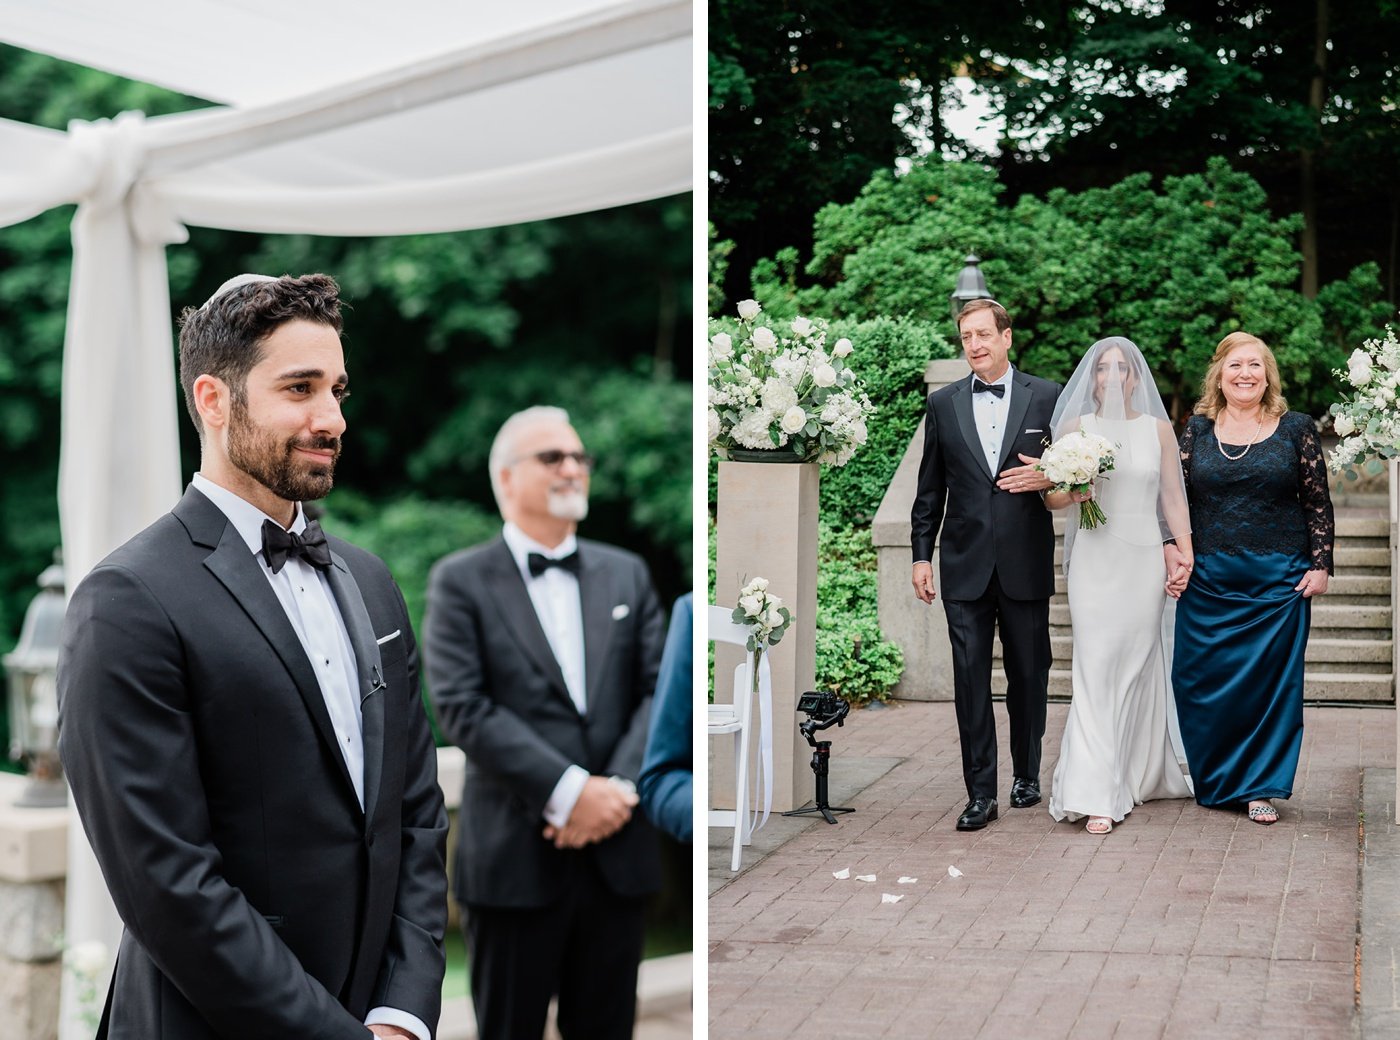 Wedding ceremony on the terrace at Tappan Hill Mansion